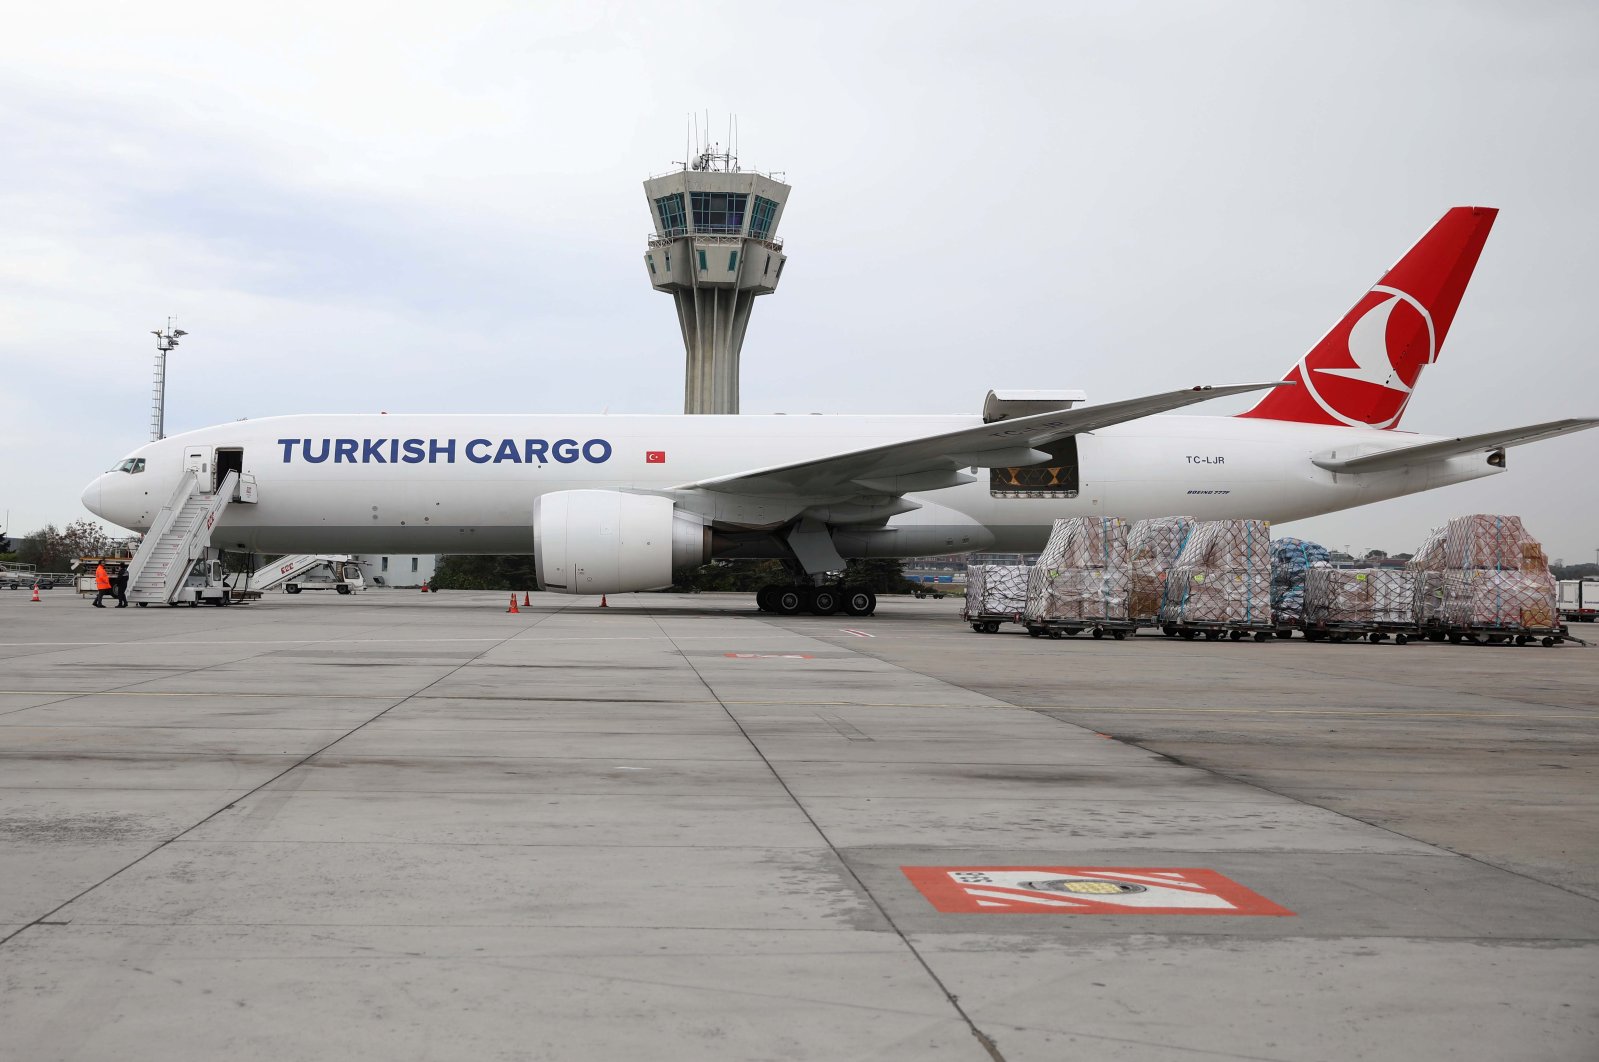 A Turkish Cargo plane carrying China&#039;s Sinovac experimental COVID-19 vaccines is seen on the tarmac of Atatürk Airport before departing to Brazil, in Istanbul, Turkey, Nov. 18, 2020. (Reuters Photo)